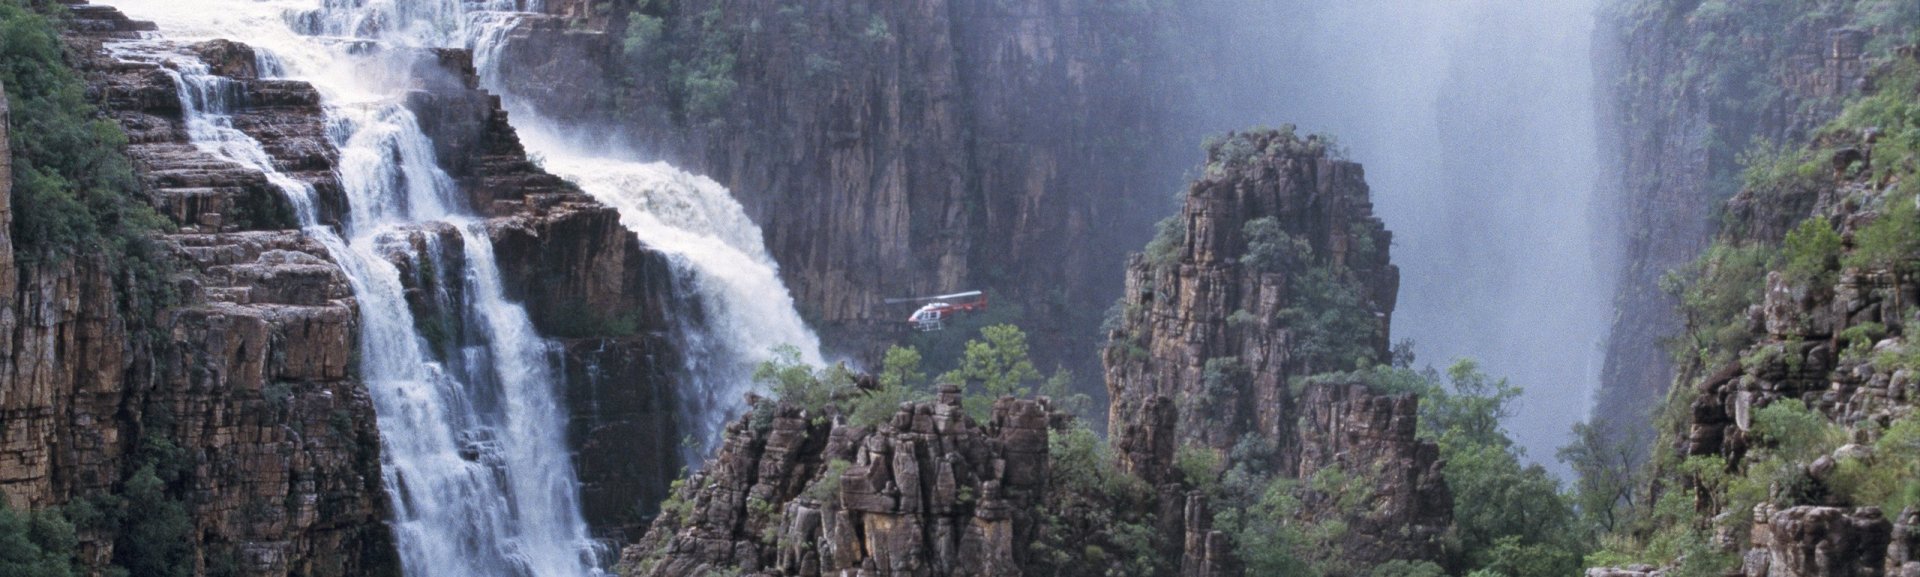 Helicopter over Twin Falls. Photo: Tourism NT